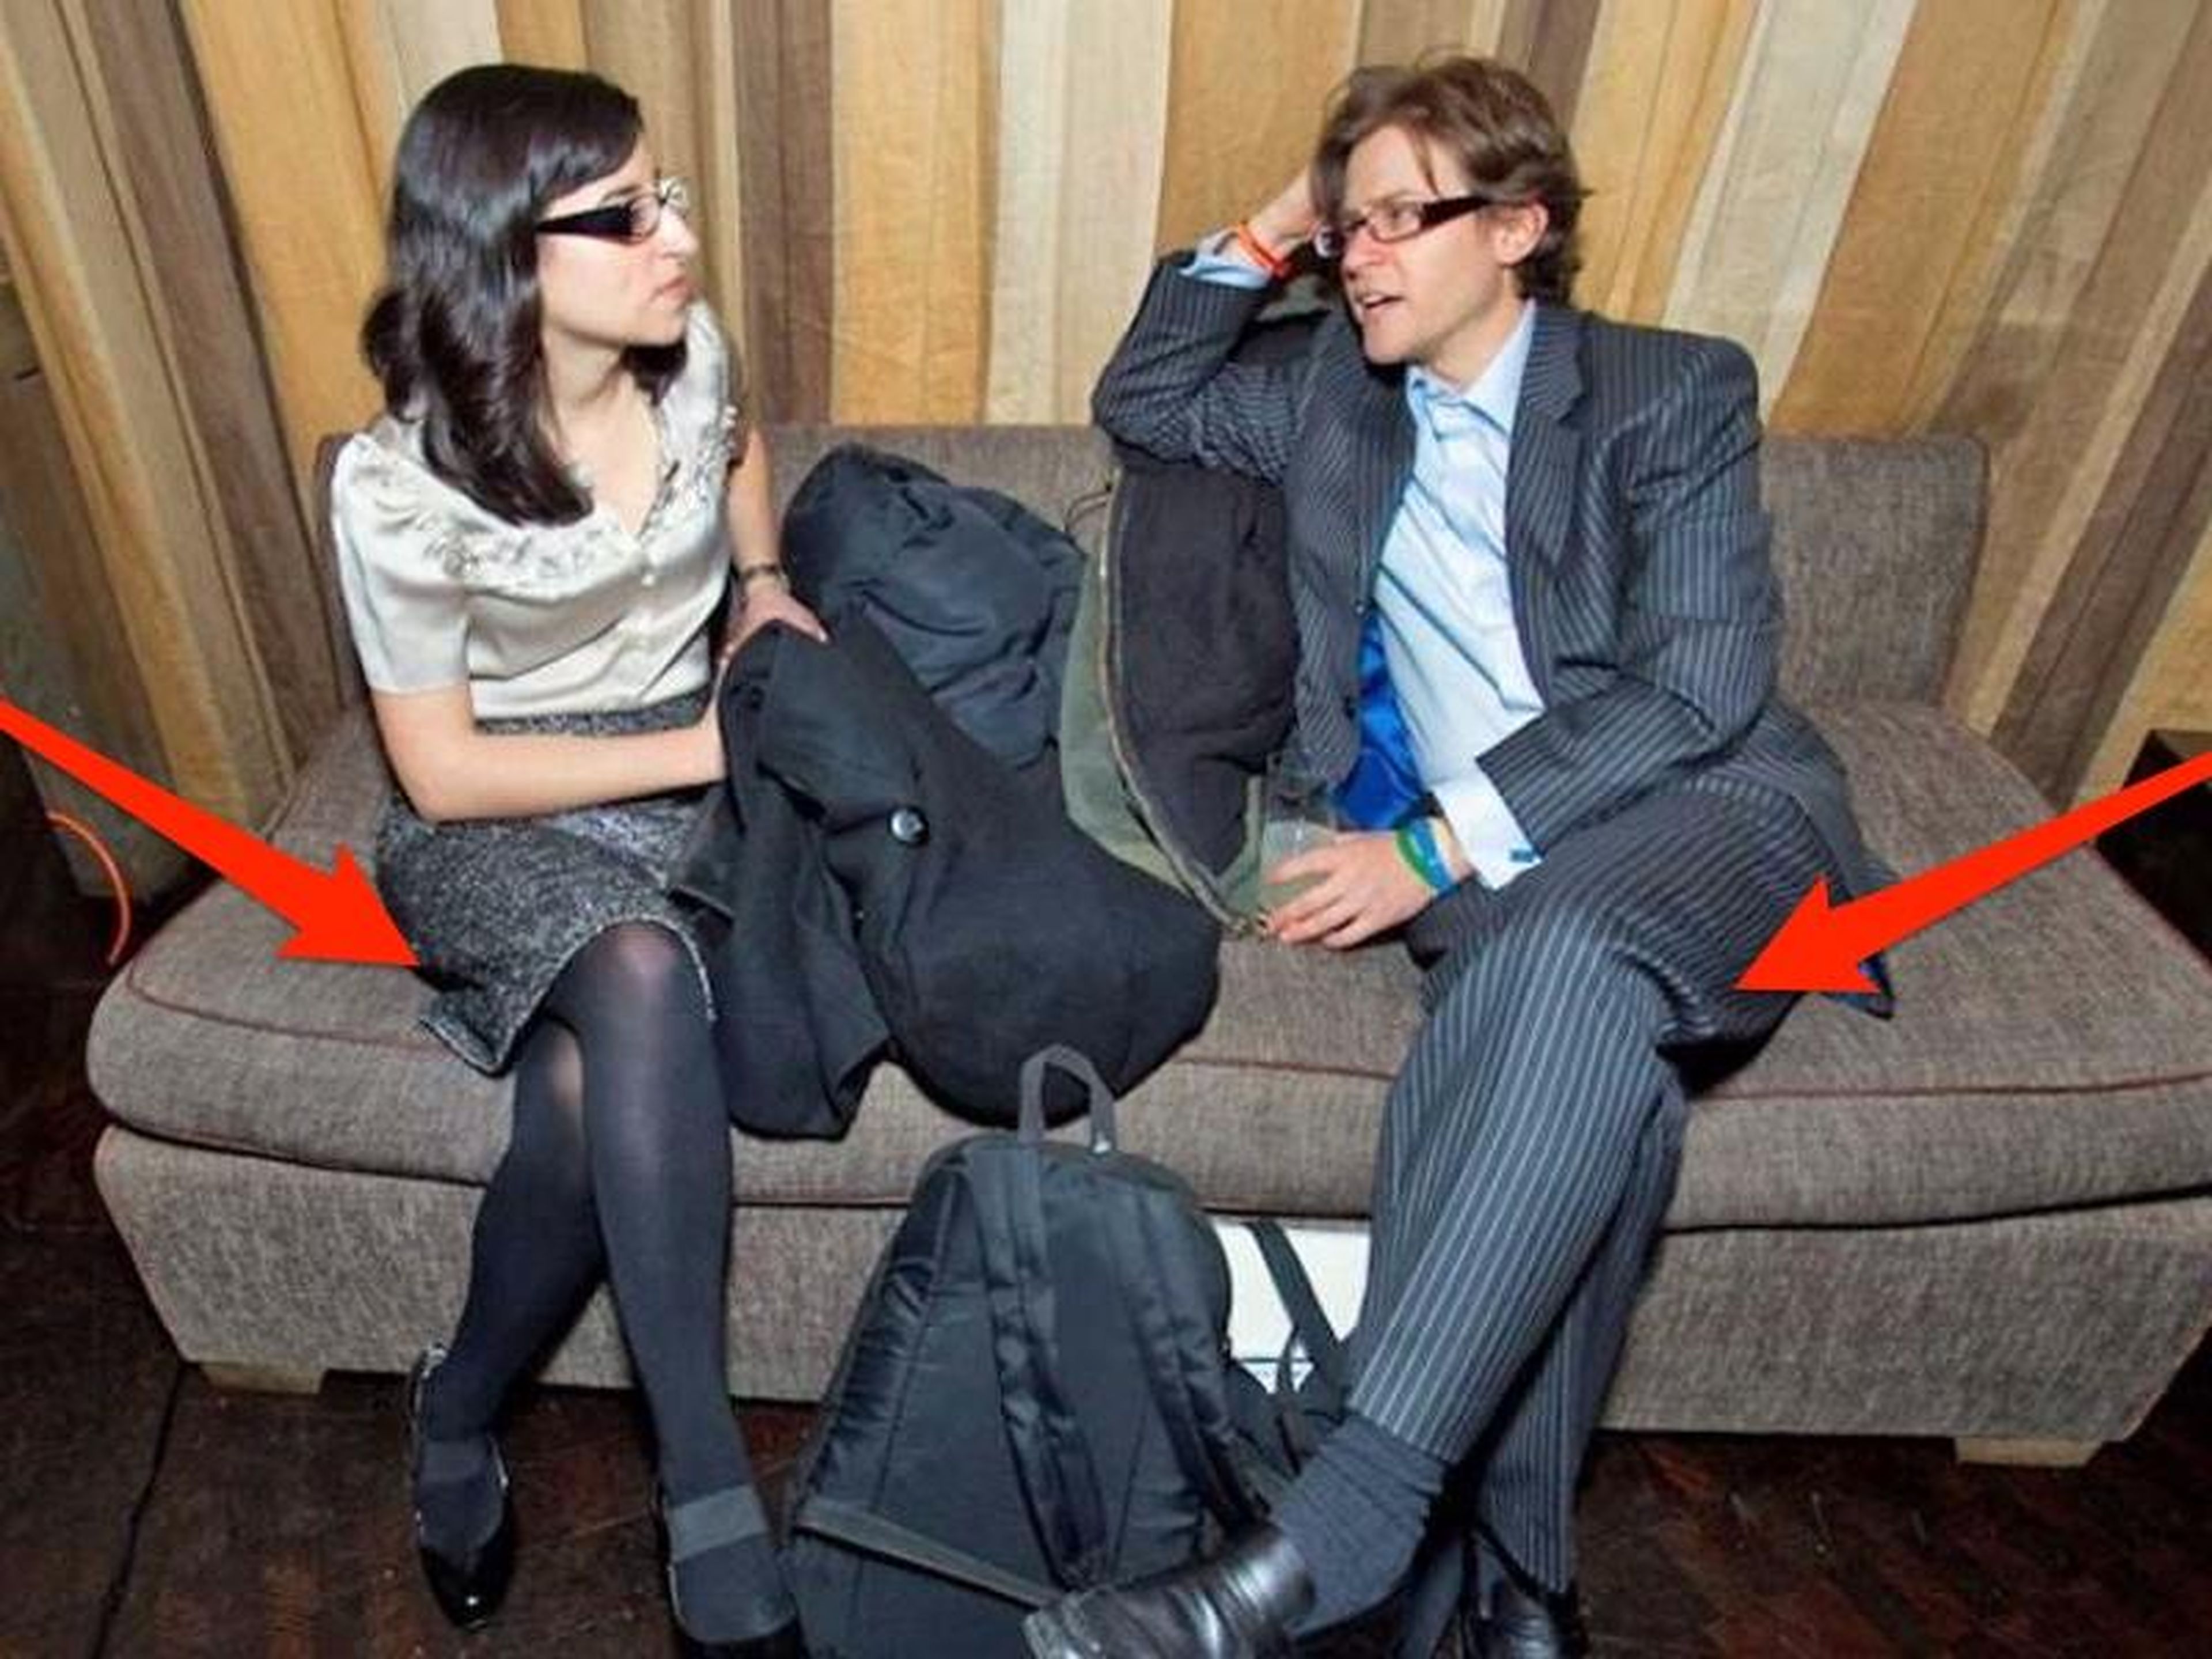 Crossed legs are usually a sign of resistance and low receptivity, and are a bad sign in a negotiation